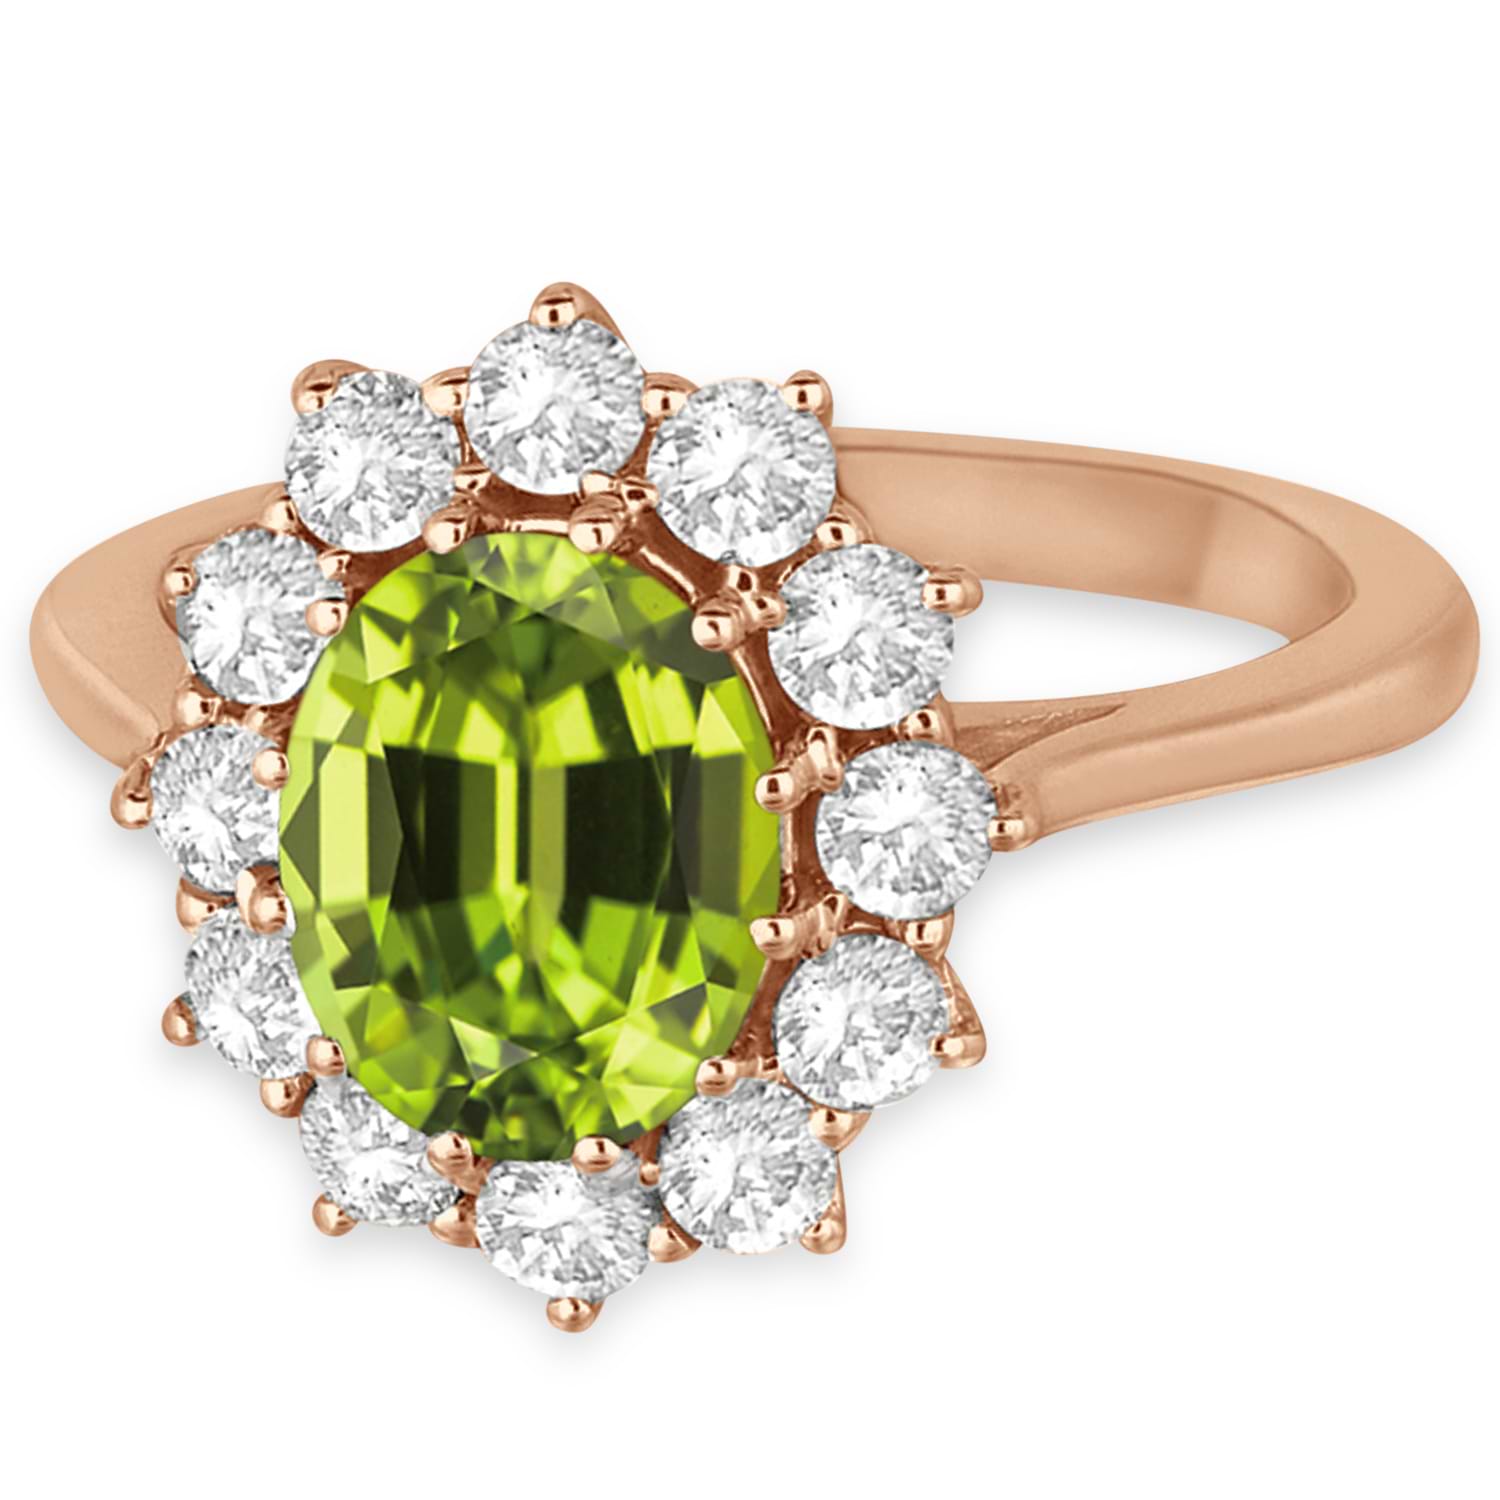 Oval Peridot & Diamond Accented Ring in 14k Rose Gold (3.60ctw)